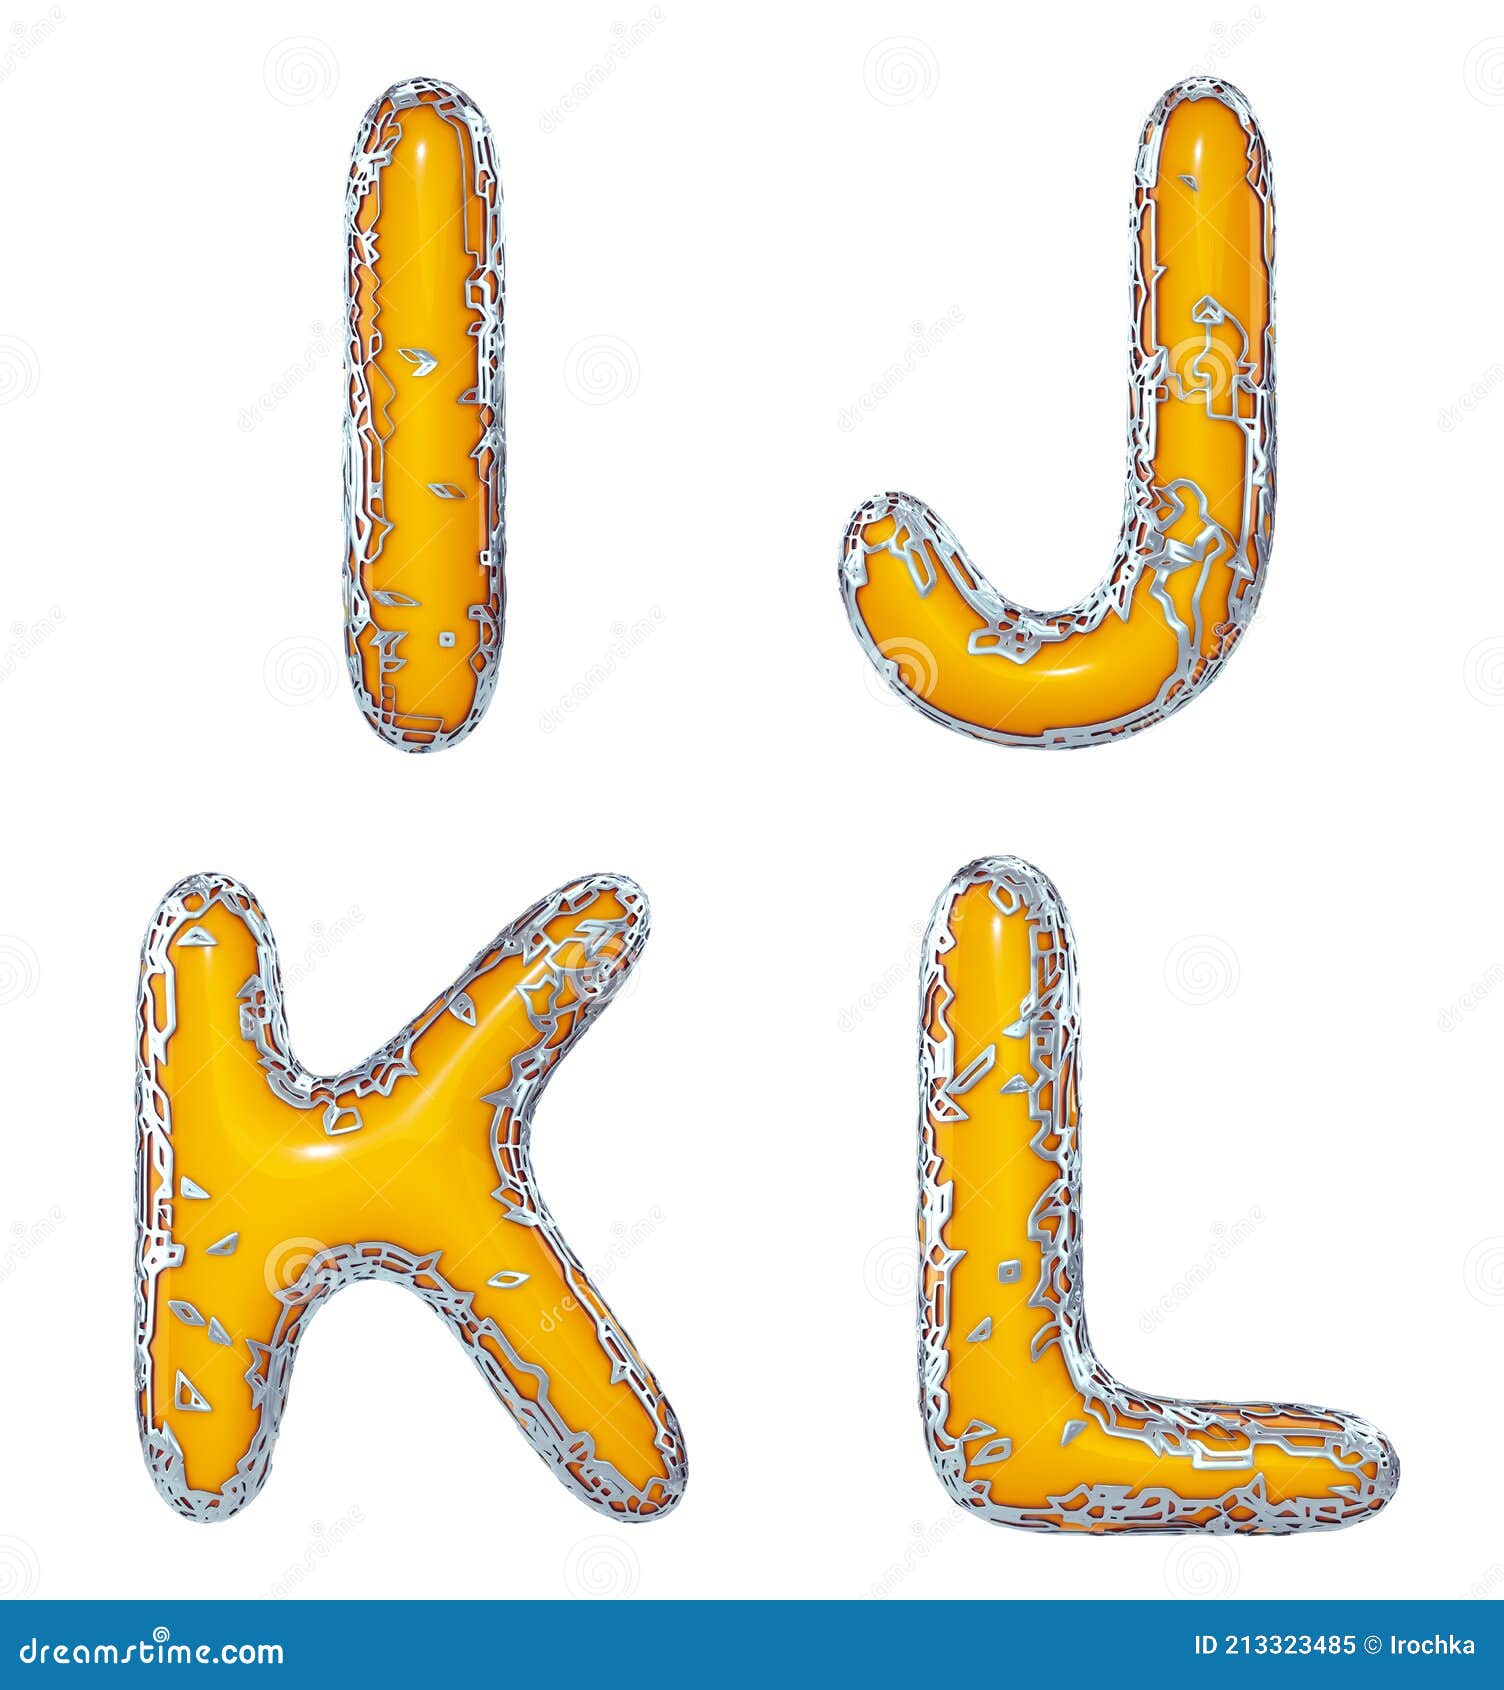 realistic 3d letters set i, j, k, l made of gold shining metal letters.